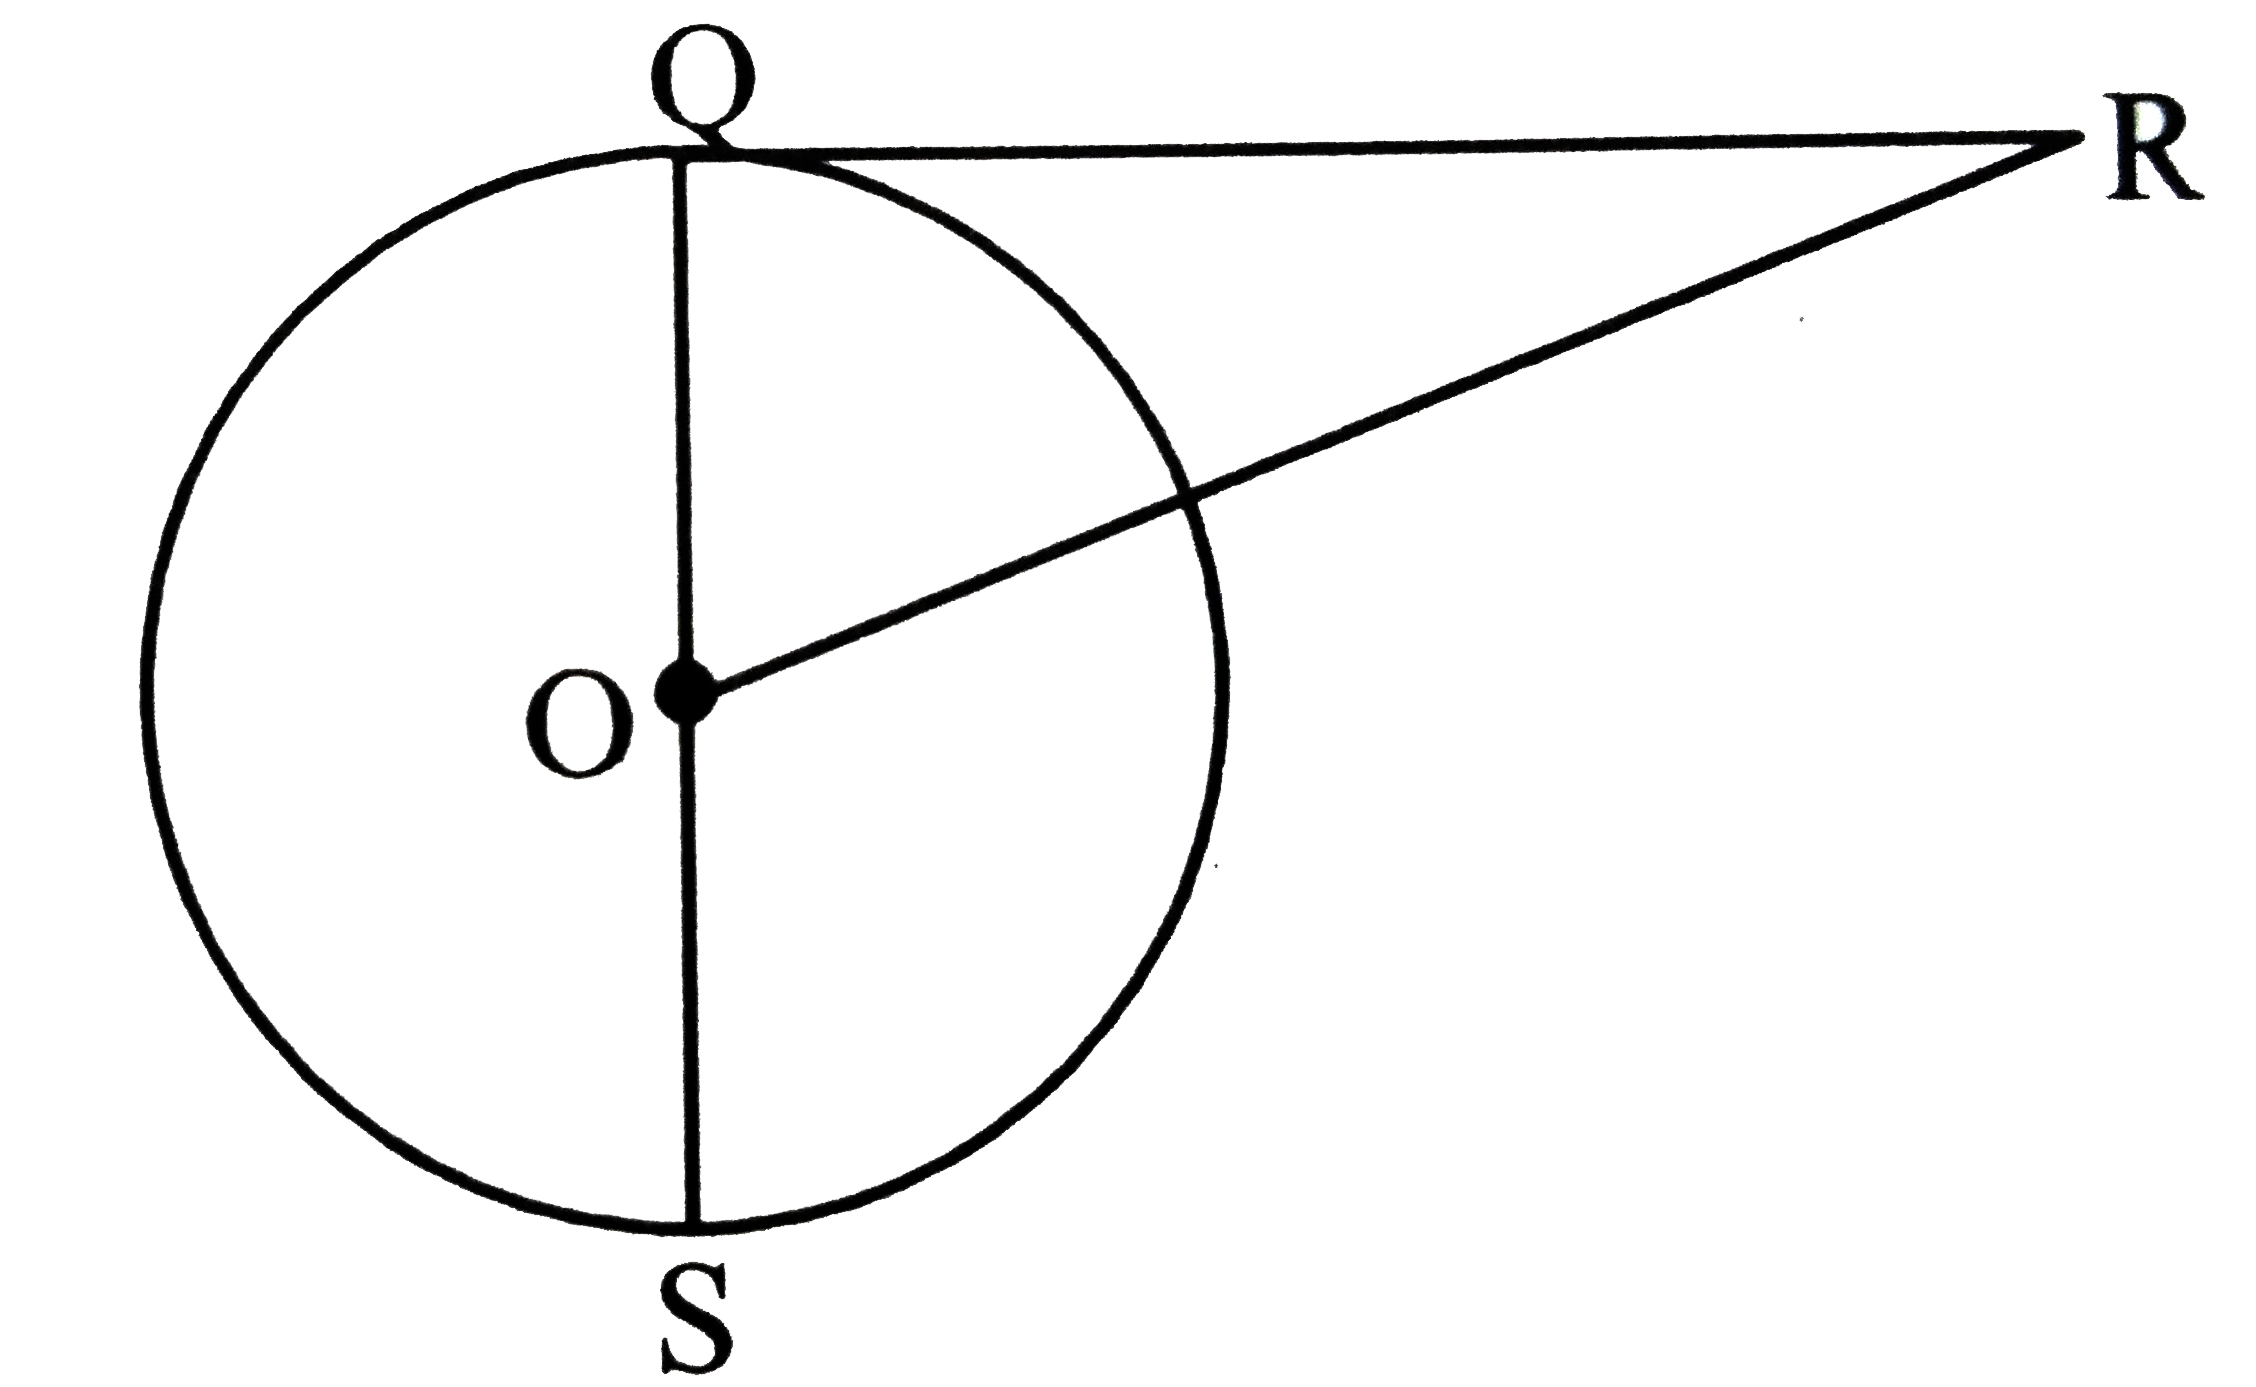 In the figure RQ is a tangent to the circle with centre O. If SQ=6cm, QR=4cm, find OR.